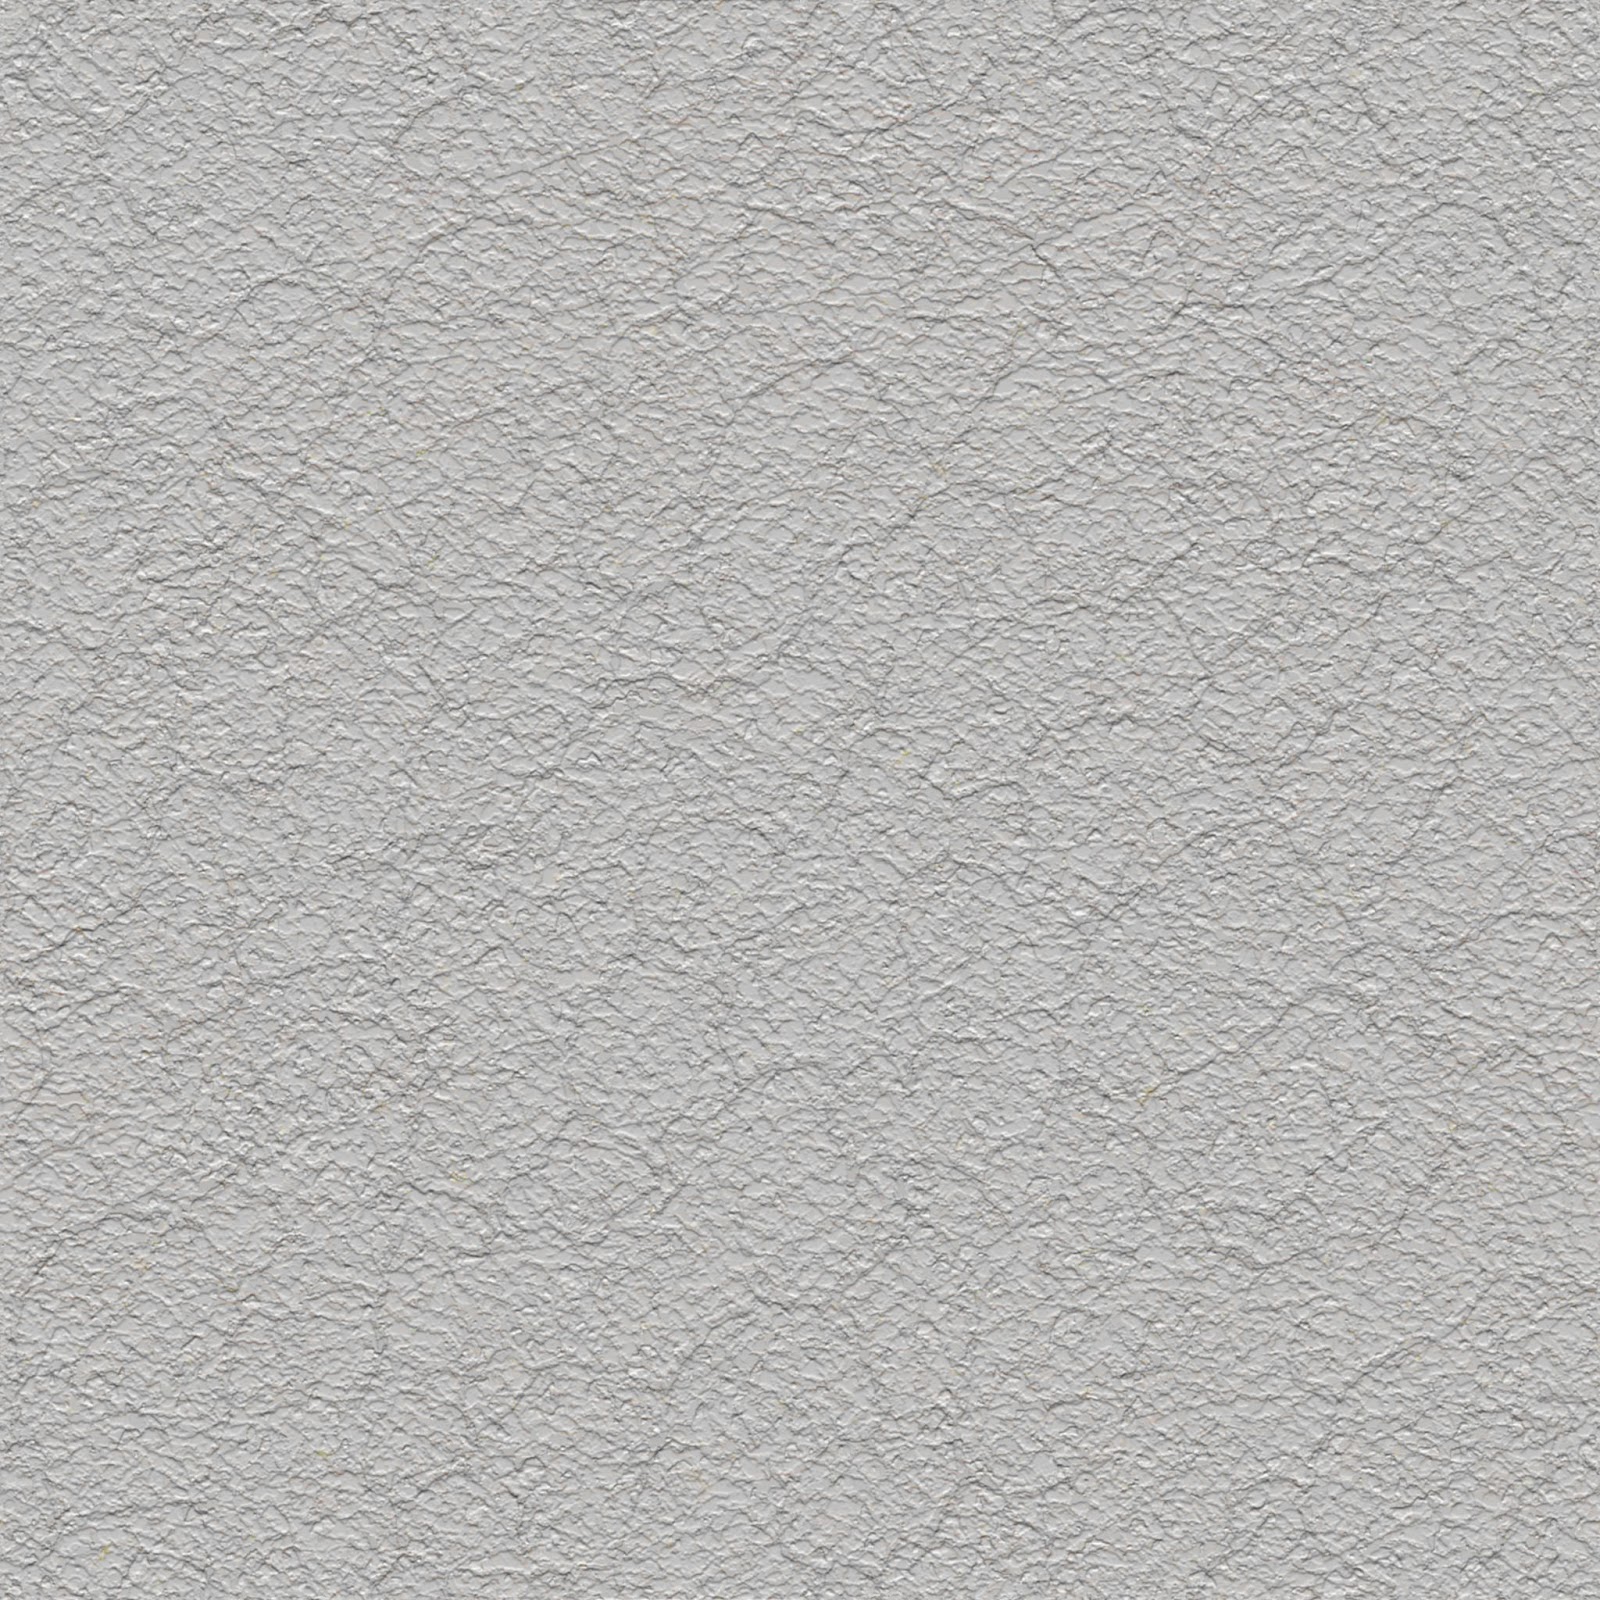 Cracked_stucco_white_paint_streaky_plaster_wall_april10_texture_seamless_tileable